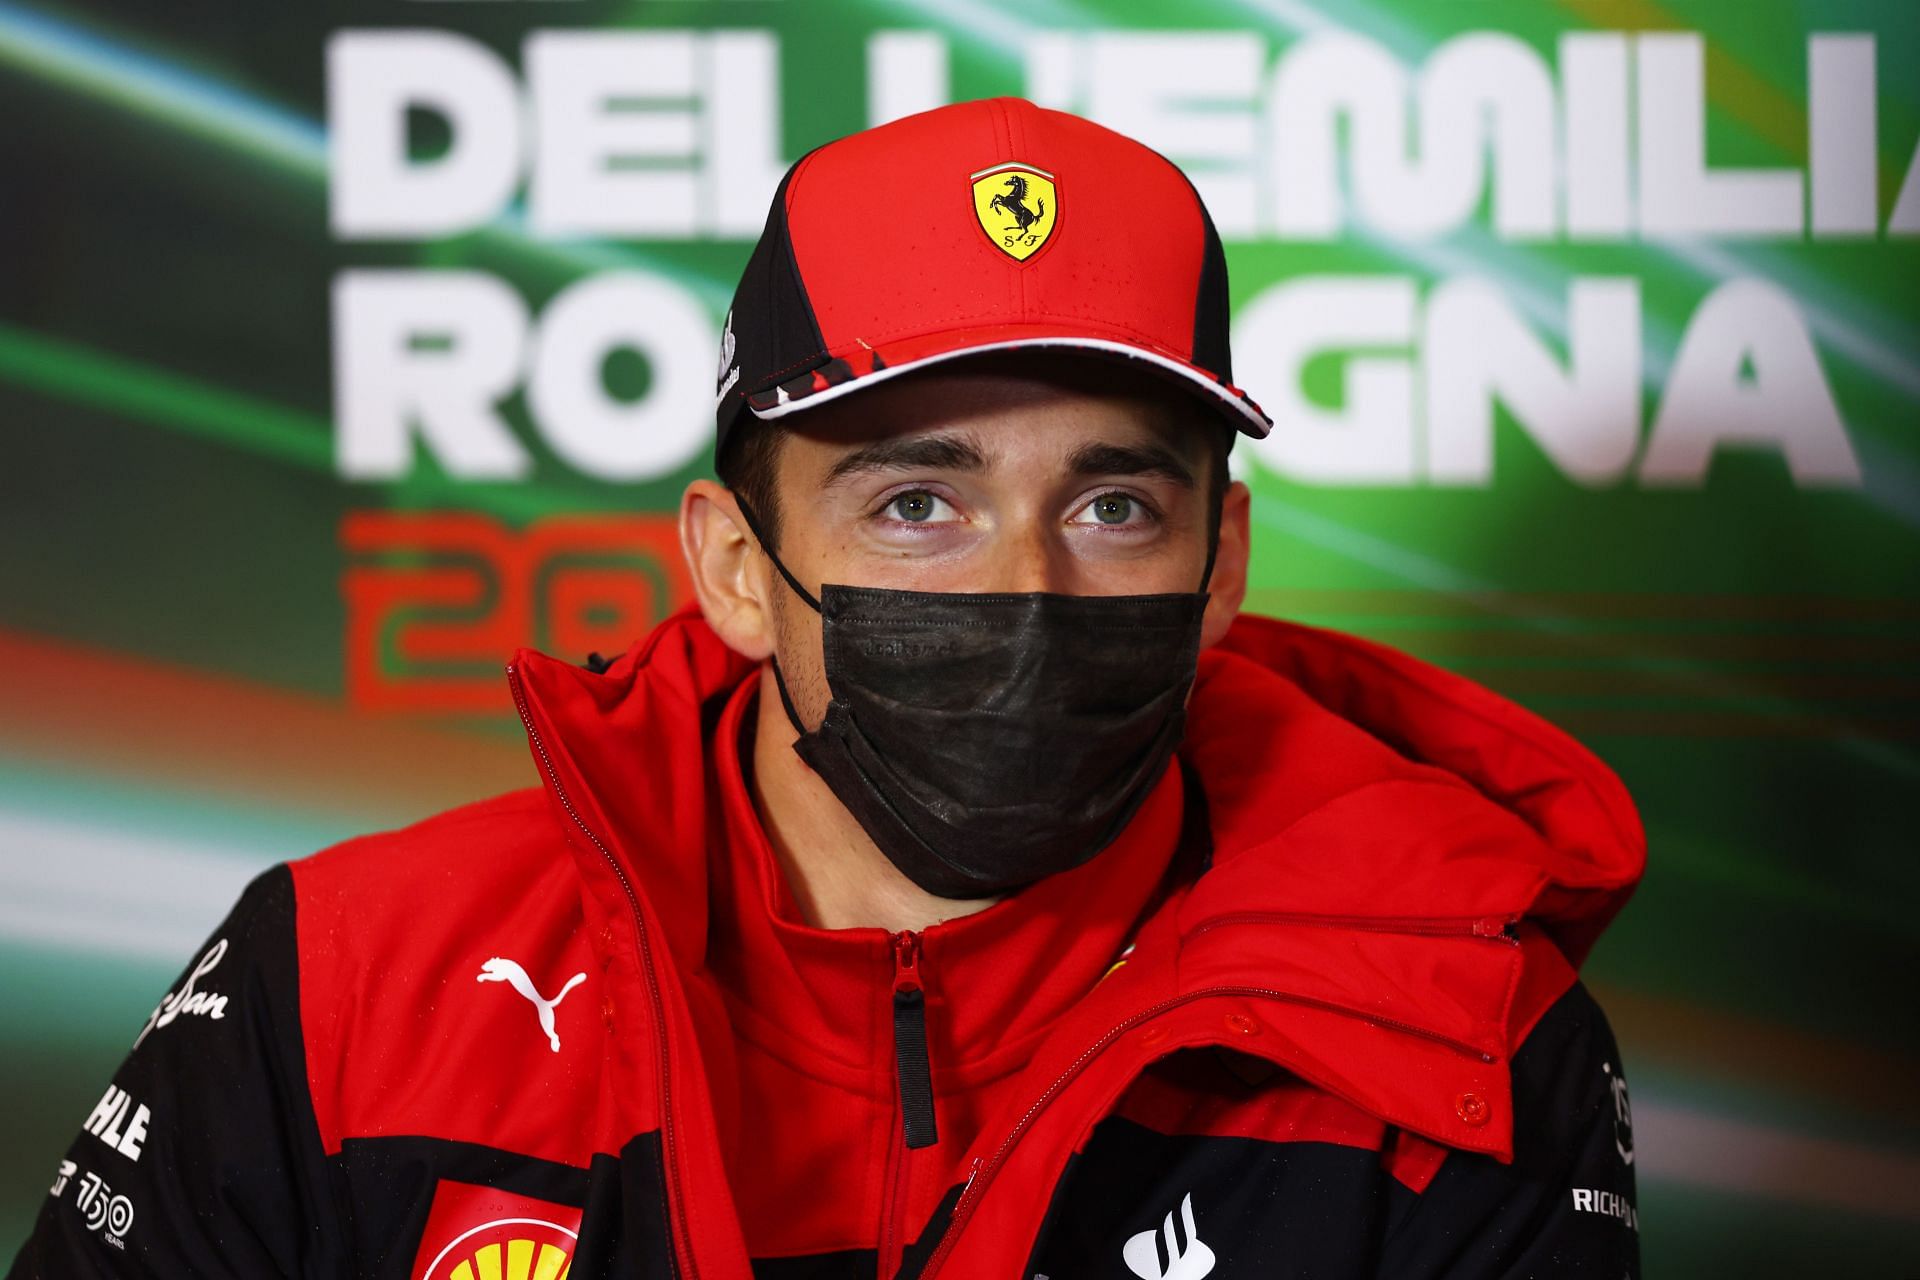 Charles Leclerc says he was &quot;very tired&quot; by the end of the 2021 season